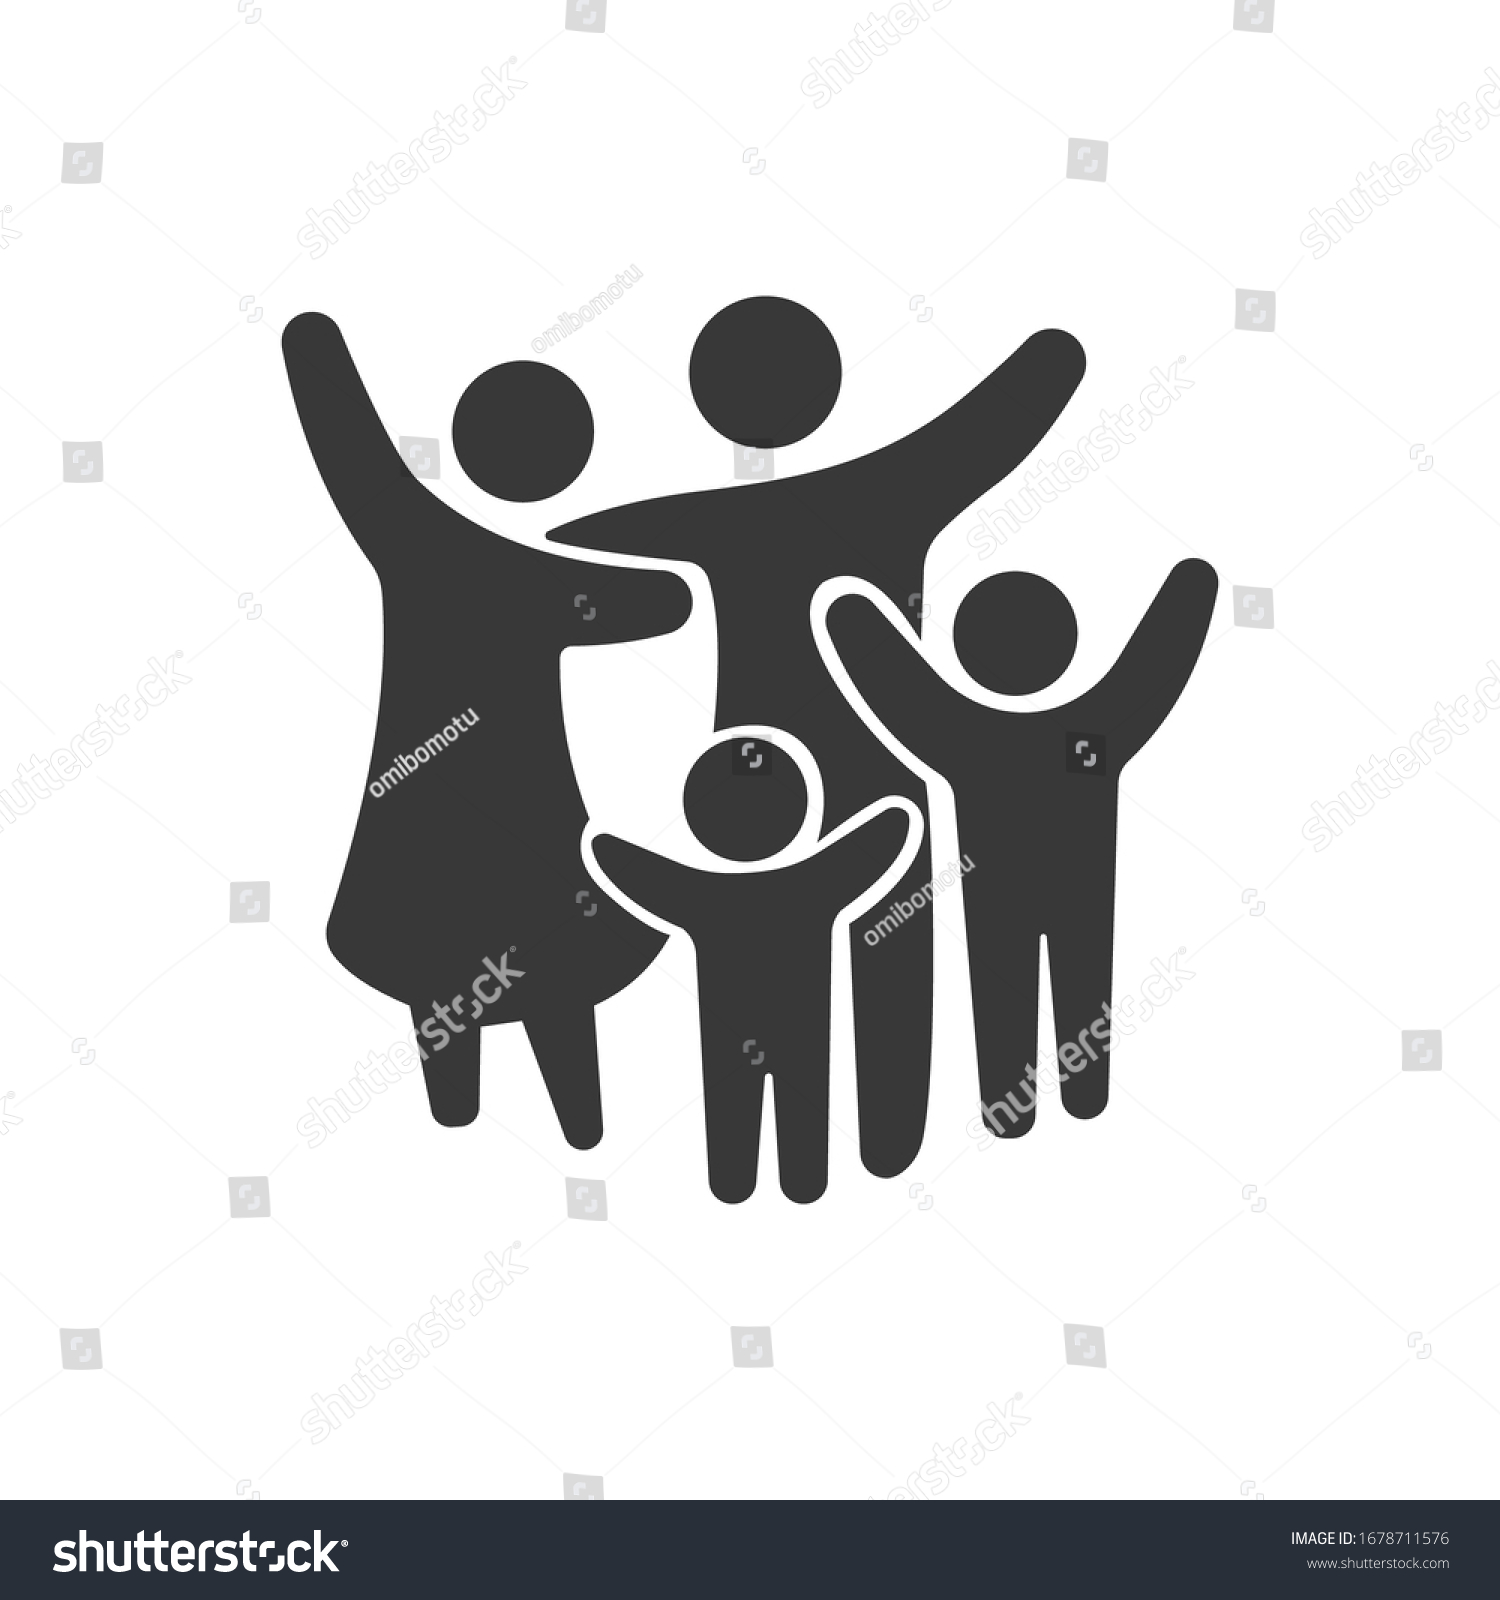 Family Flat Icon Black and White Vector Graphic #1678711576